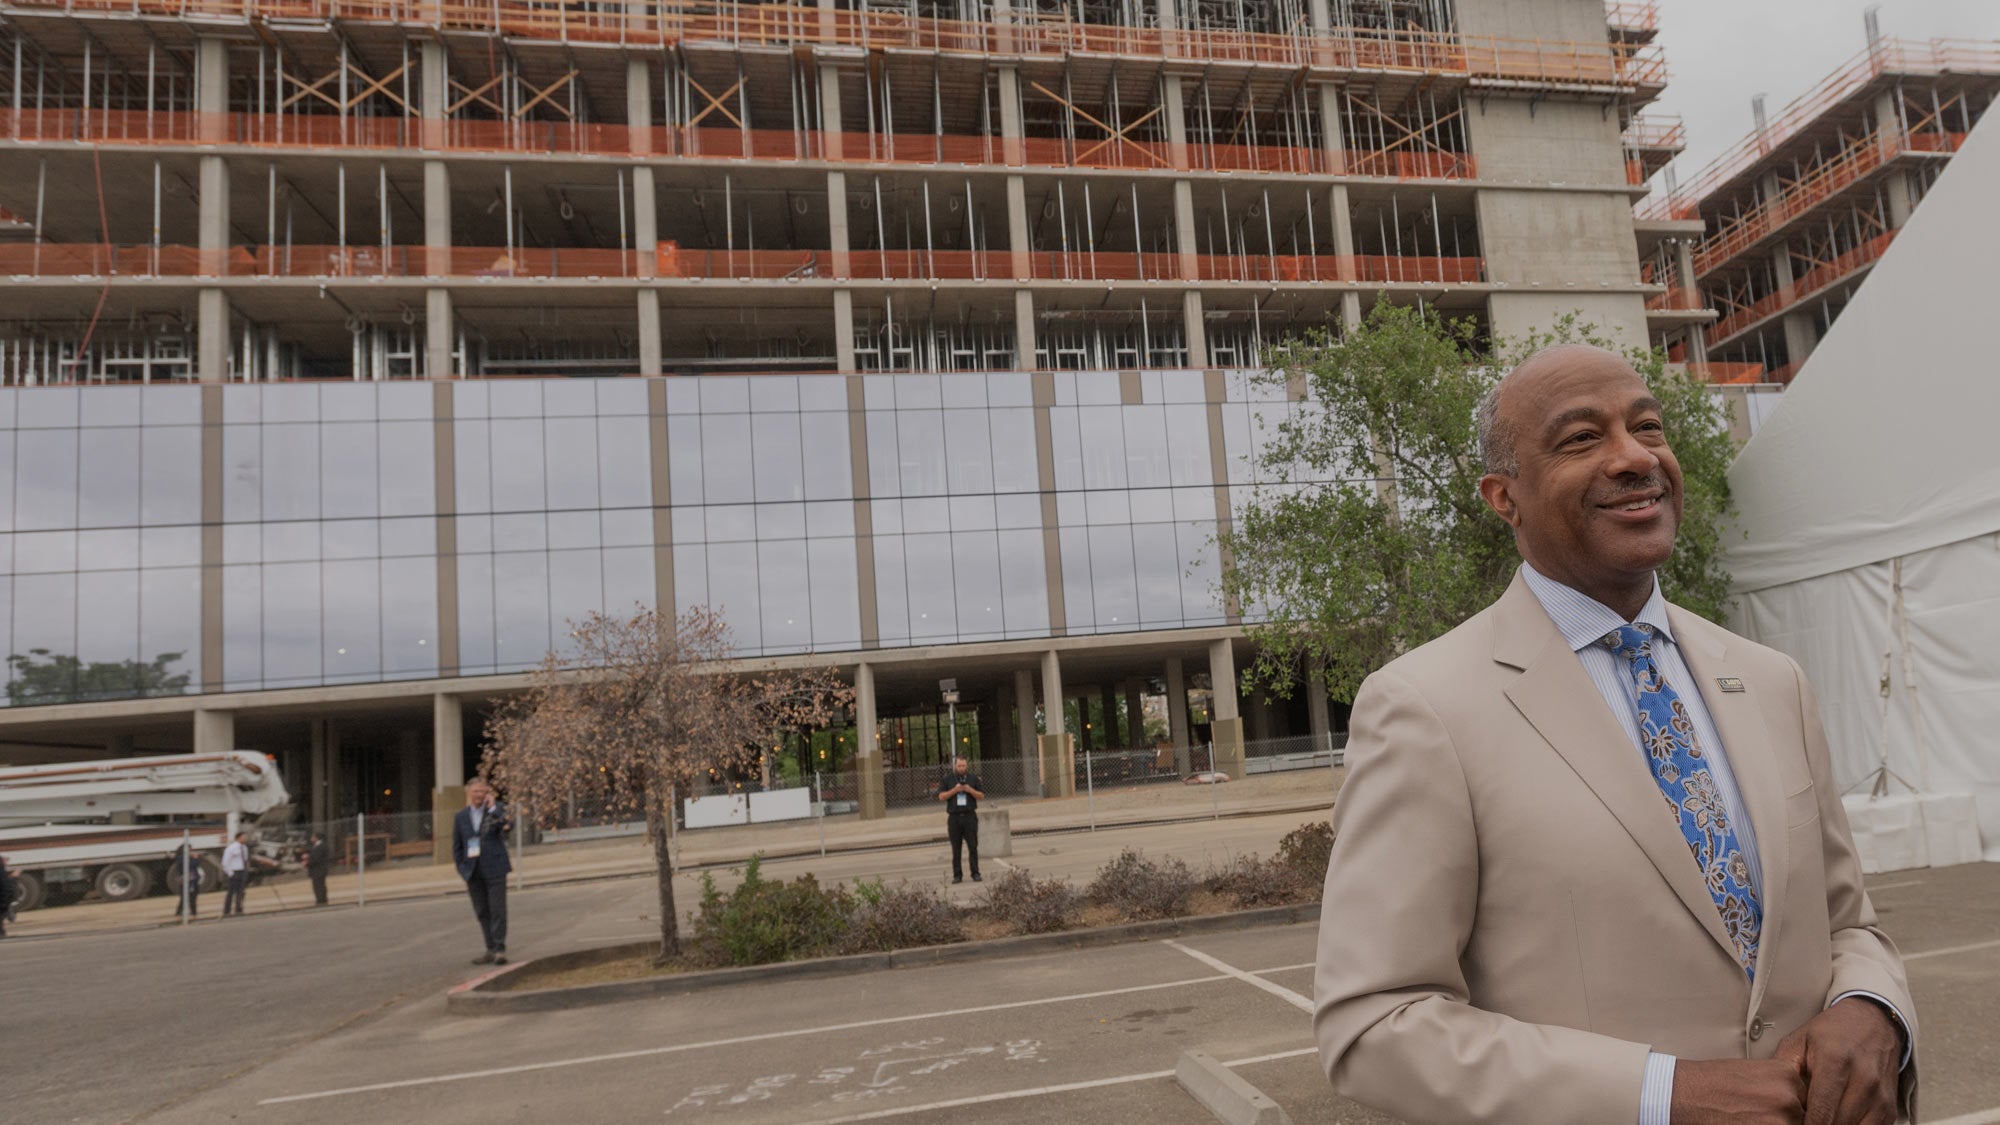 Chancellor Gary S. May smiles proudly in front of the new building under construction, a symbol of growth and progress at UC Davis. (Gregory Urquiaga/UC Davis)